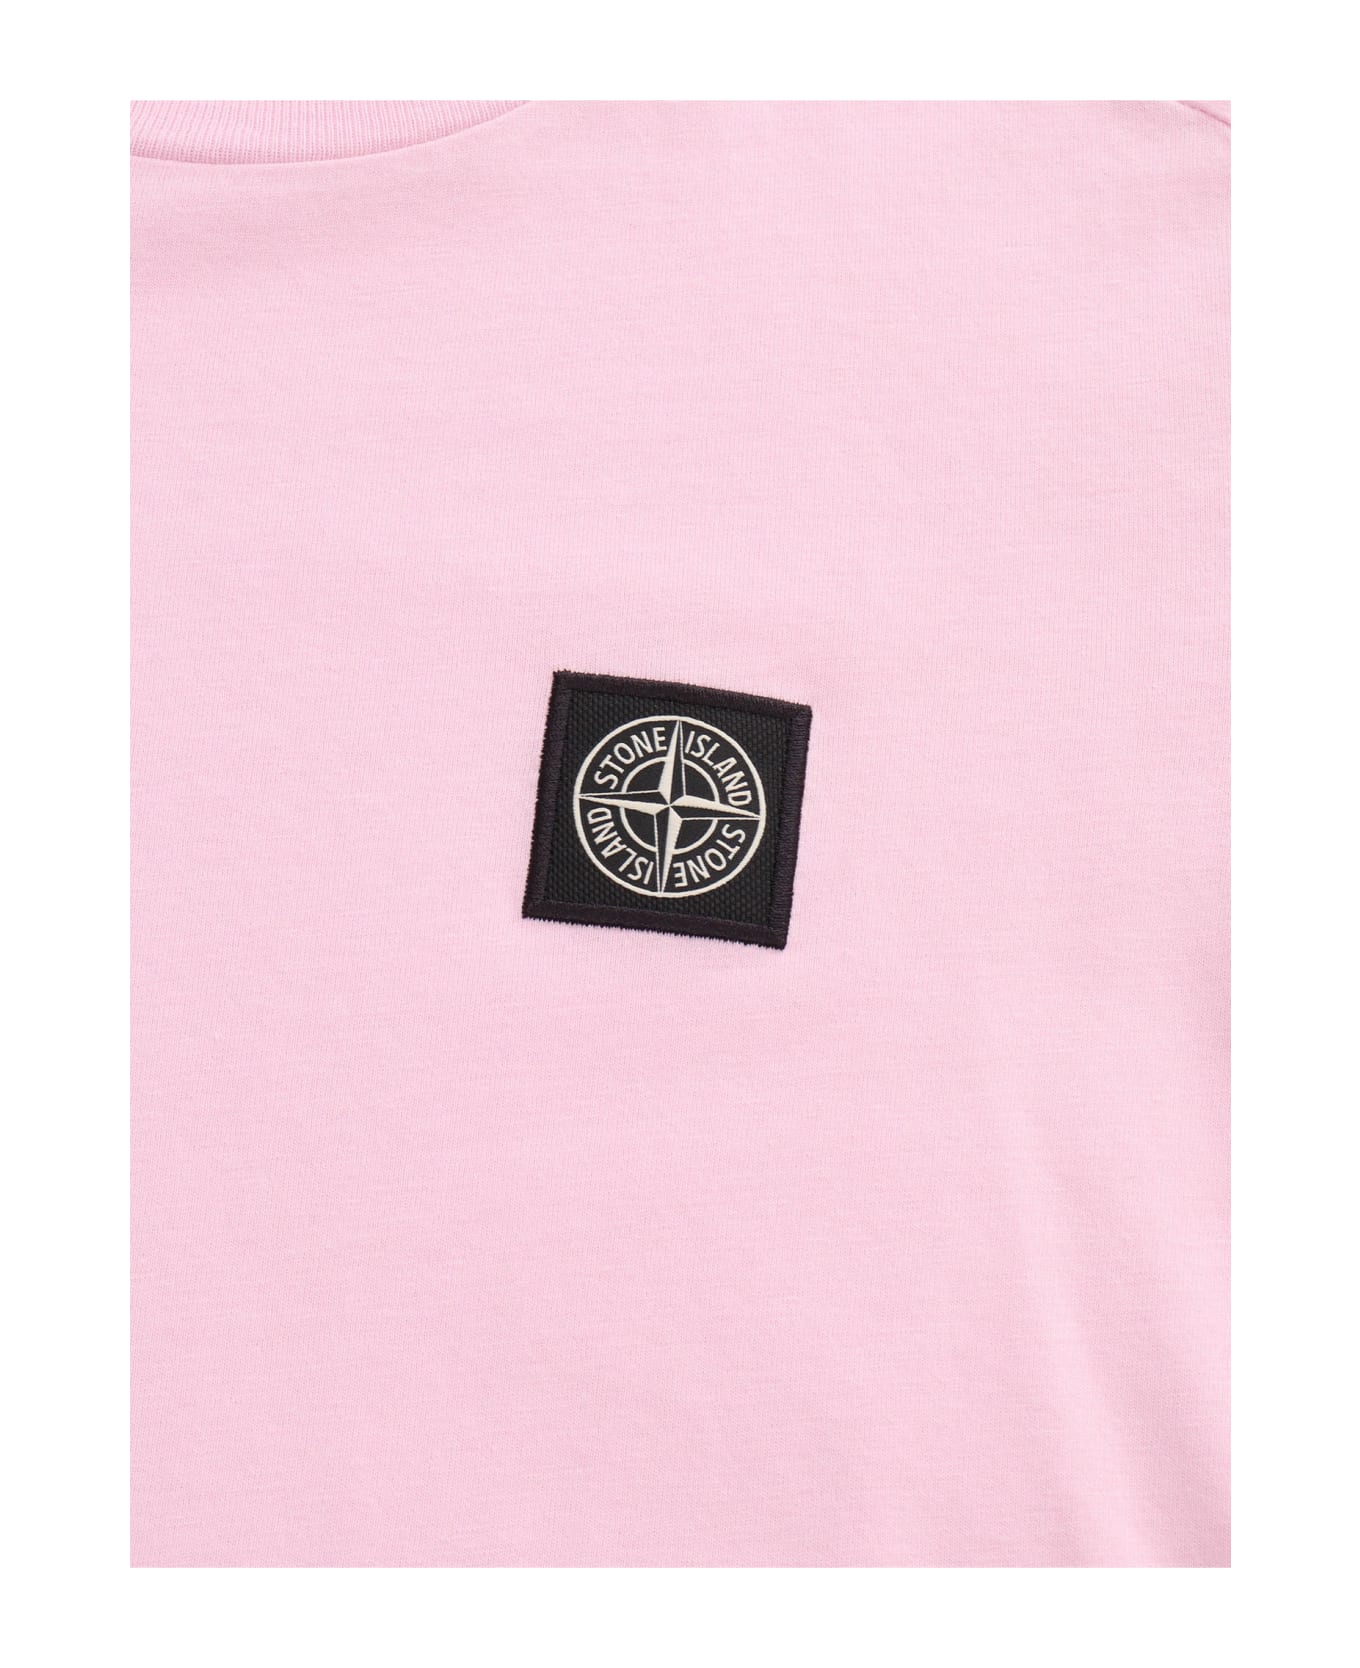 Stone Island Junior Pink T-shirt With Logo - PINK Tシャツ＆ポロシャツ